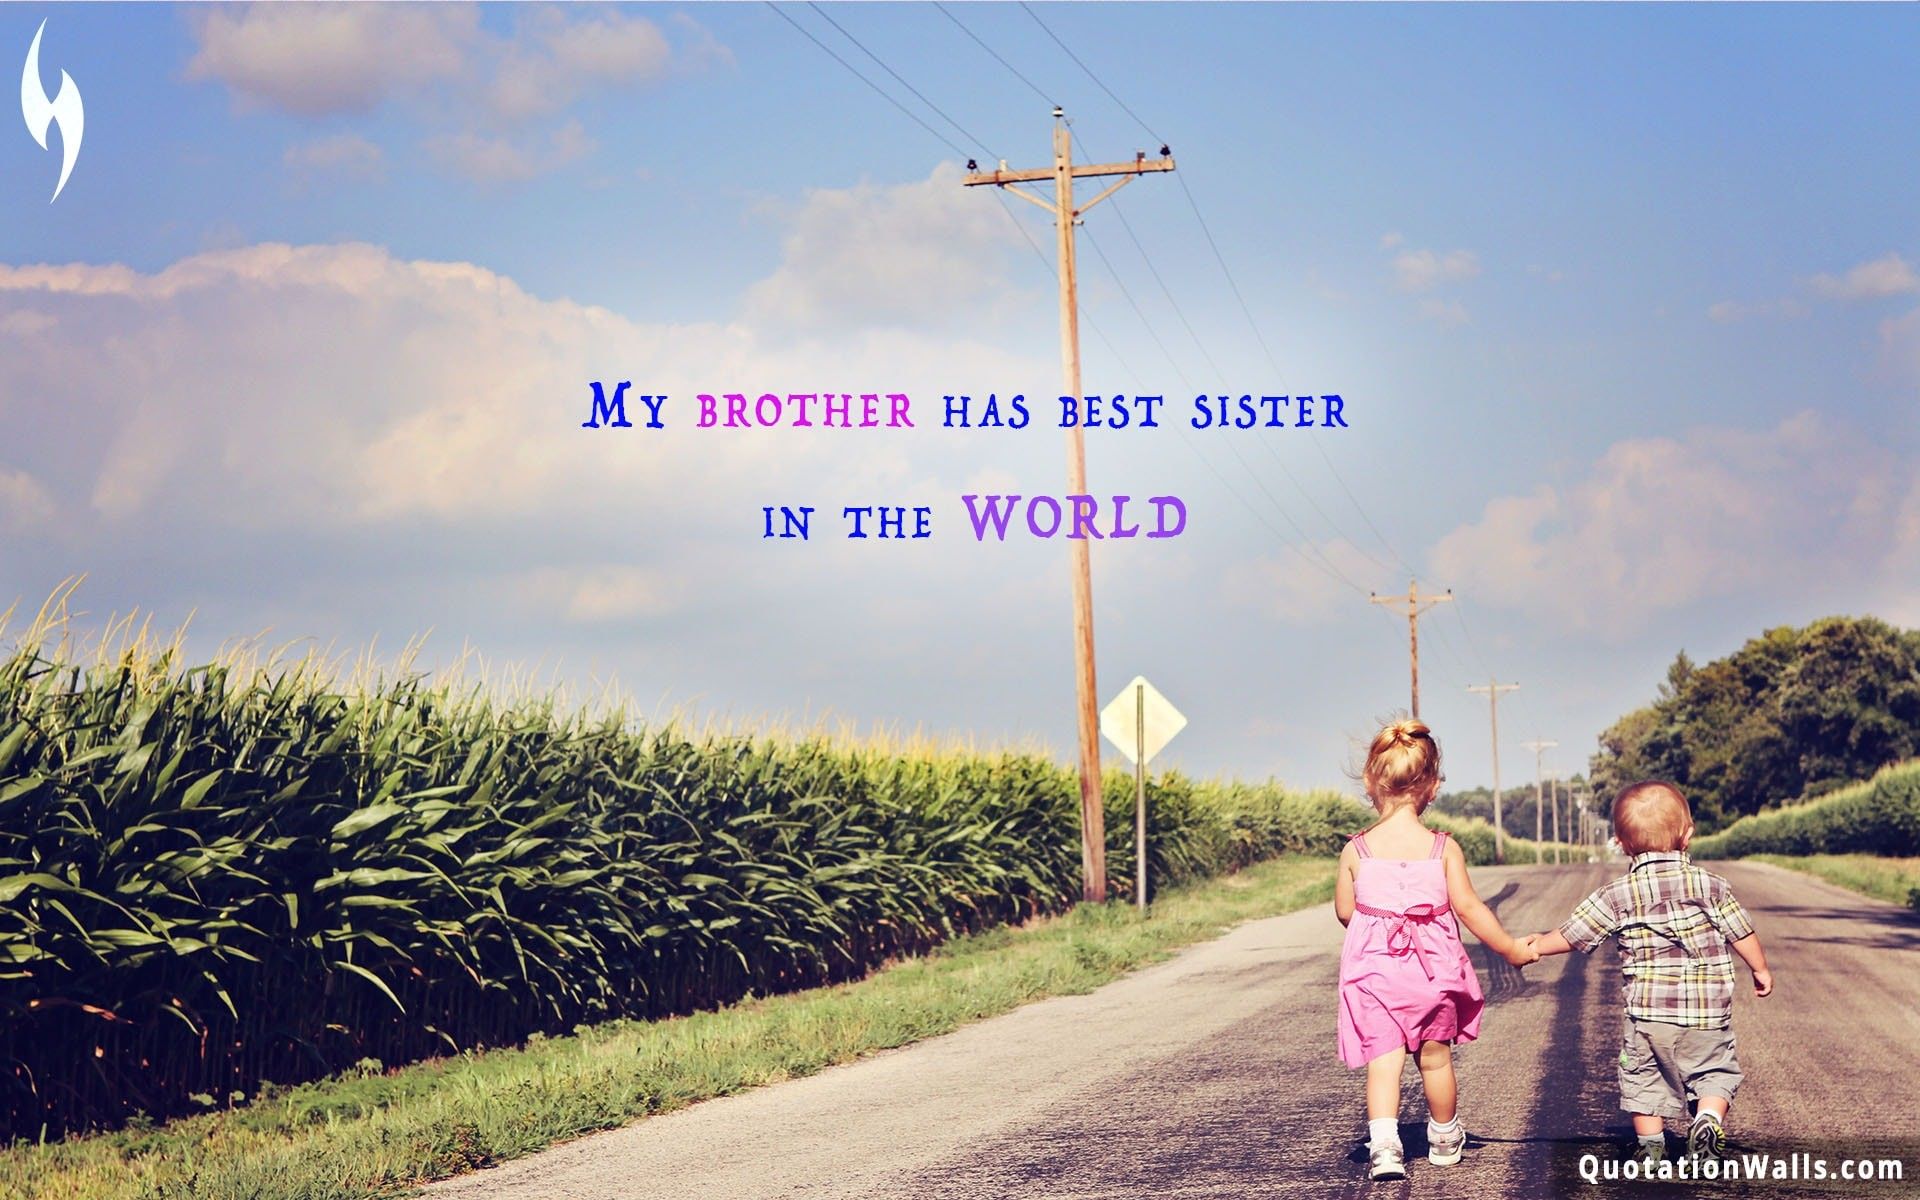 Brother quote: My brother has best sister in the world